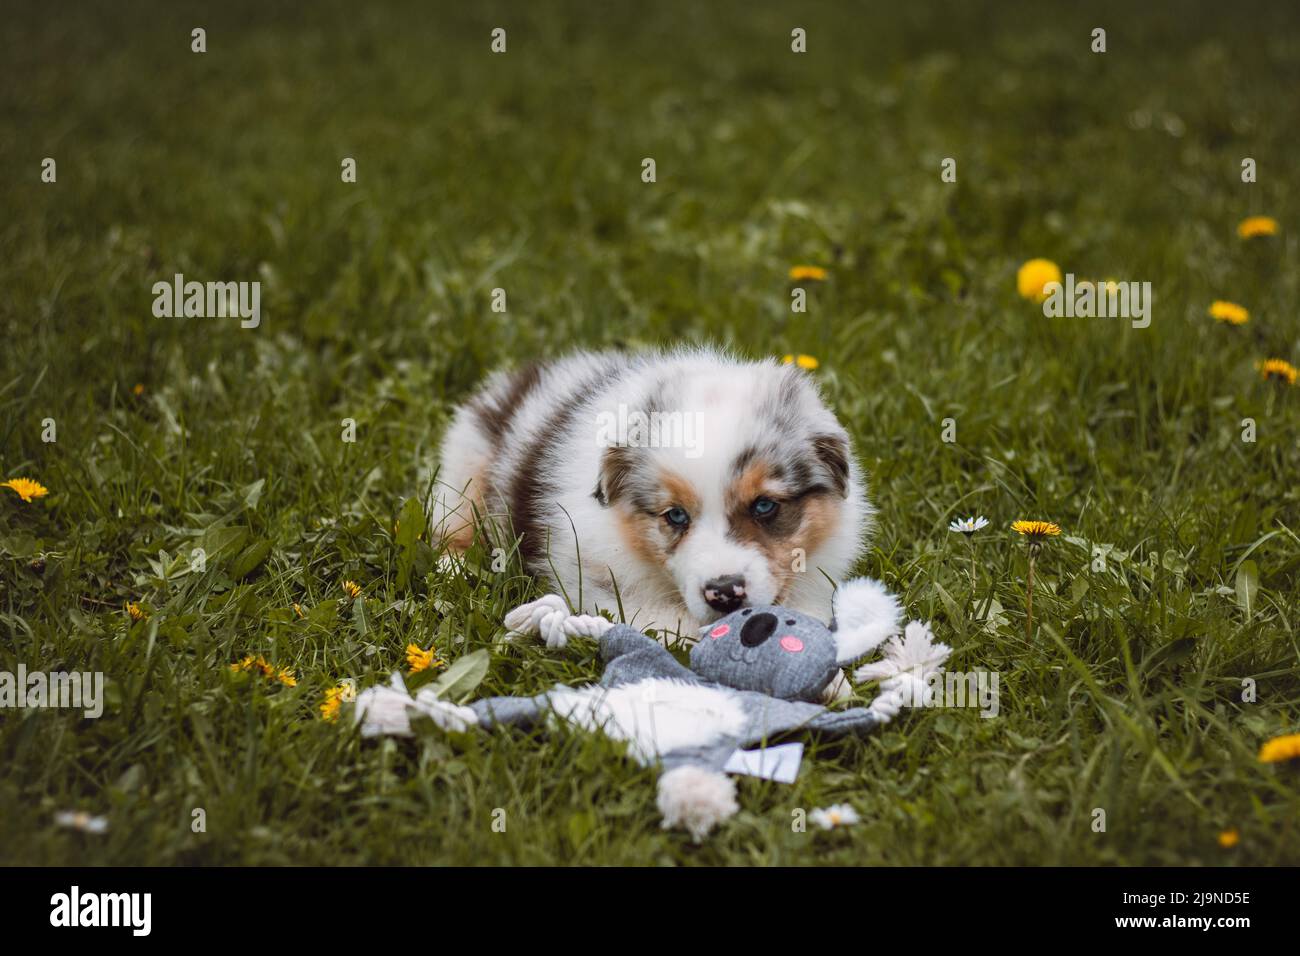 Australian Shepherd puppy romps around the garden with his toy. A mischievous female Canis lupus breed. Blue merle running around outside. Stock Photo